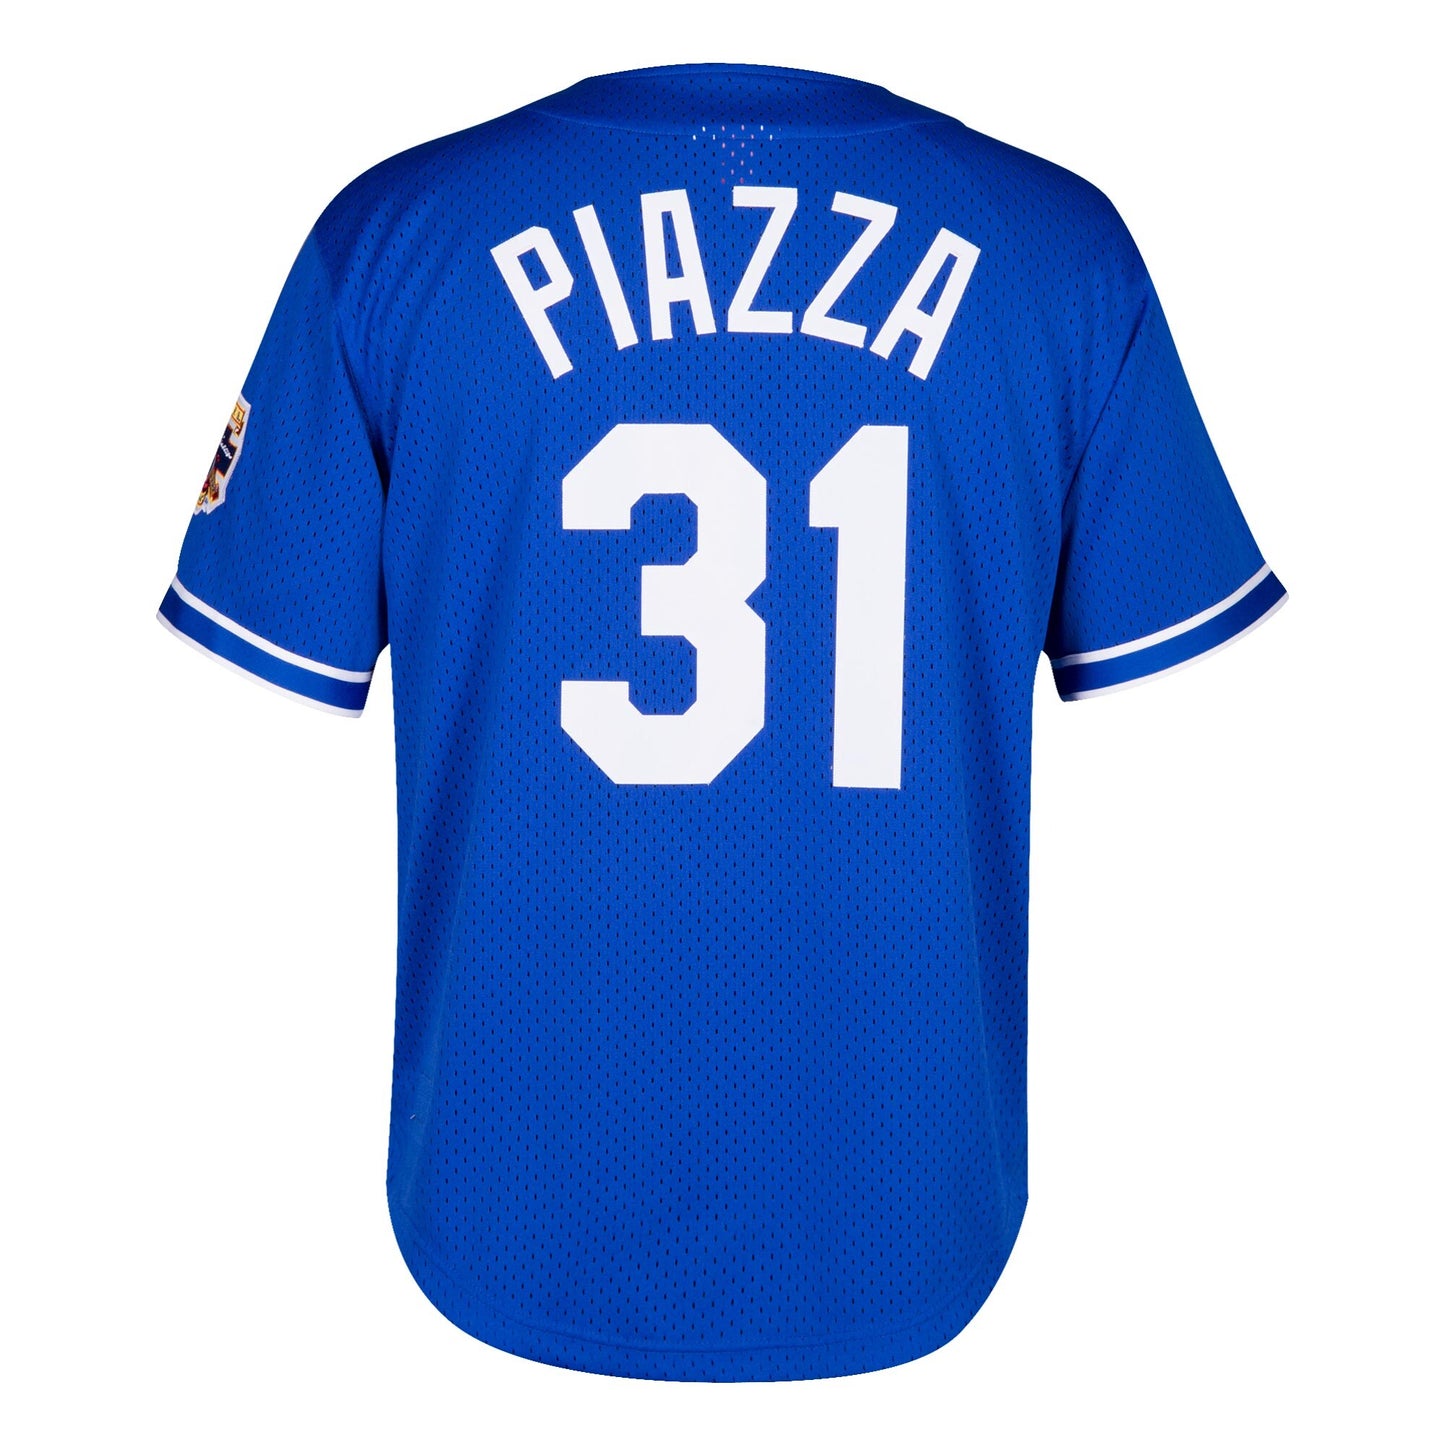 Youth Los Angeles Dodgers Mike Piazza Mitchell & Ness Blue Cooperstown Collection Batting Practice Jersey